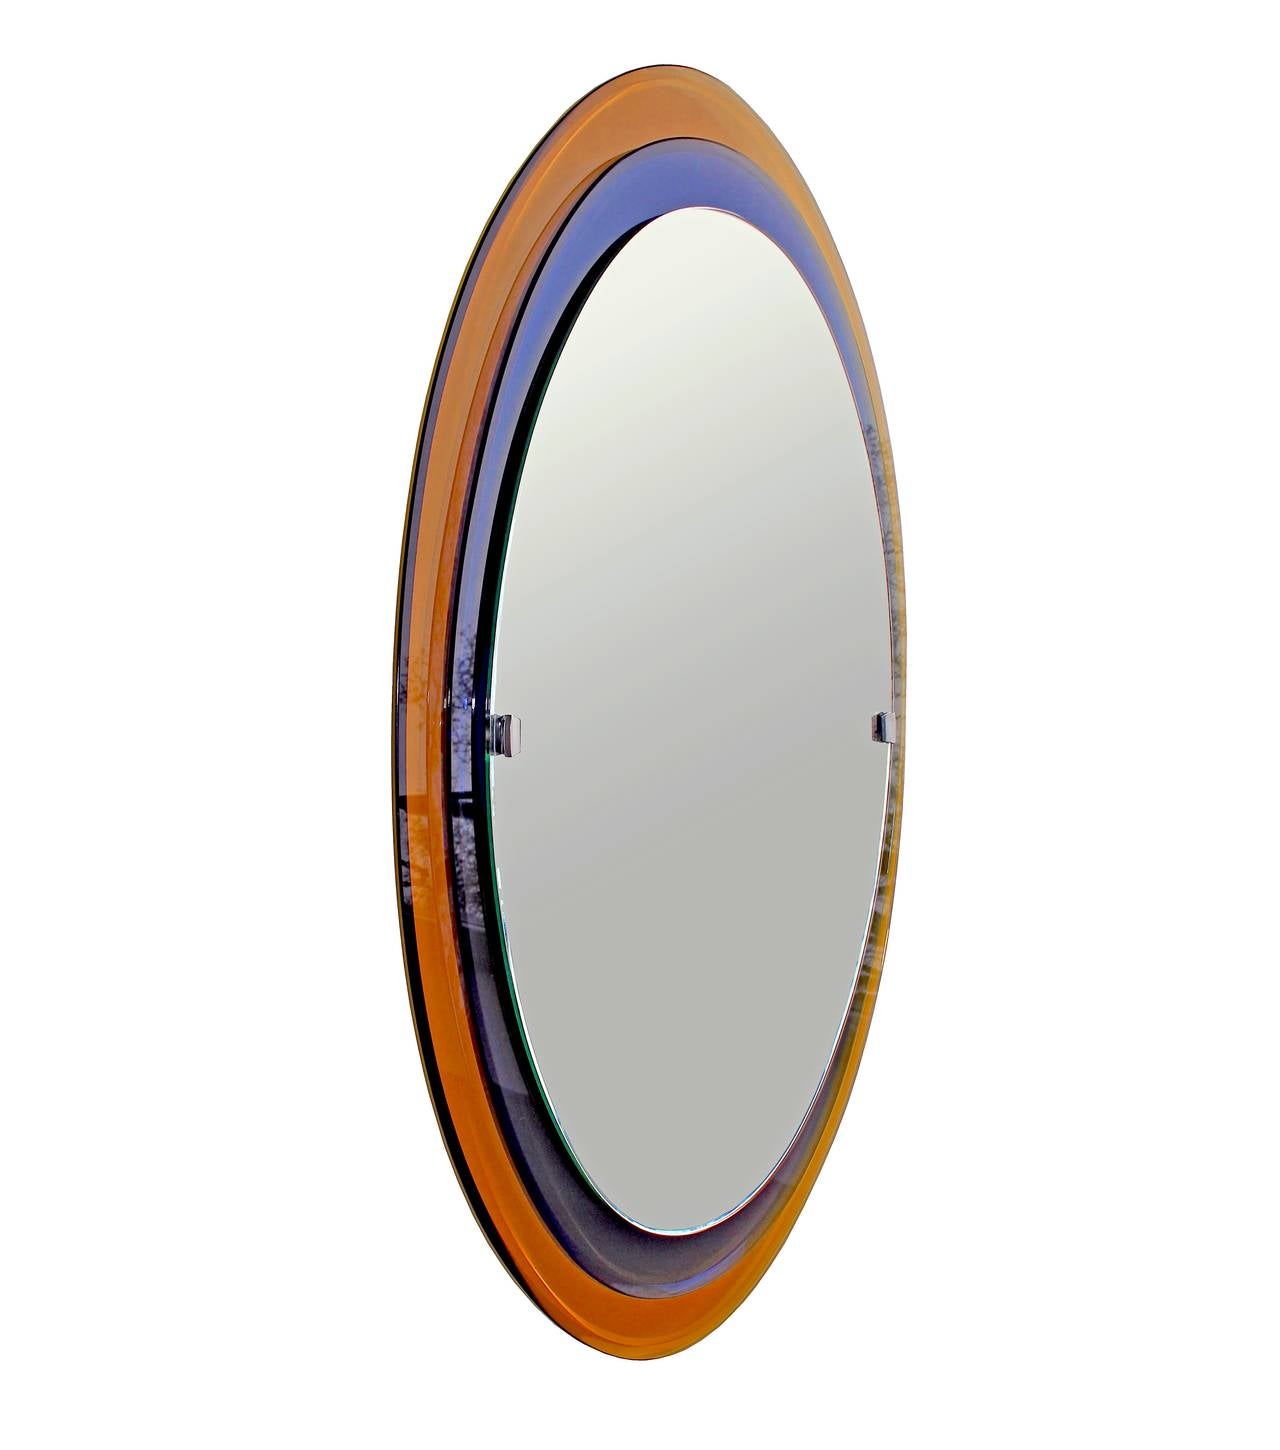 Oval stepped mirror in yellow and blue glass with nickelled brass mounts by Fontana Arte. 
Model no: 2046. Retains original label on mirror pane and also 'Fontanit' label on back.
Documented in Quaderni di Fontana Arte 1964.